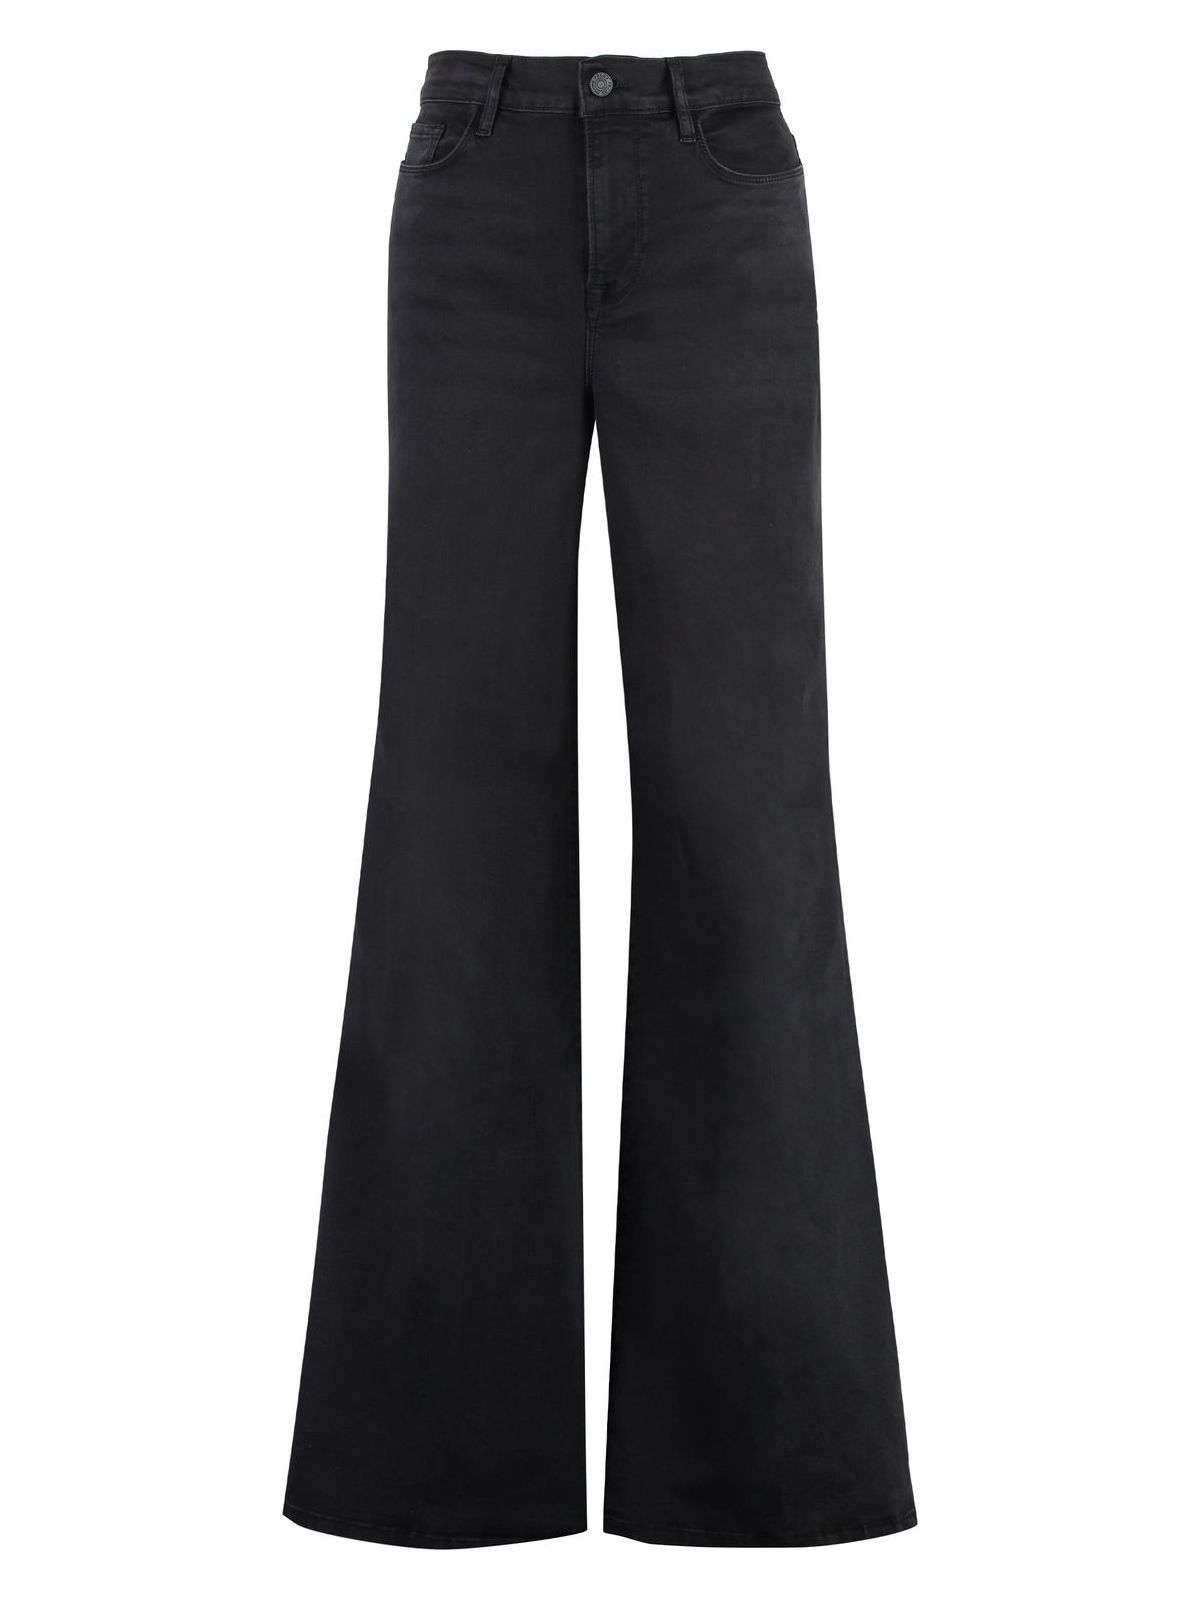 KRRY FRAME LE PIXIE PALAZZO WIDE-LEG JEANS